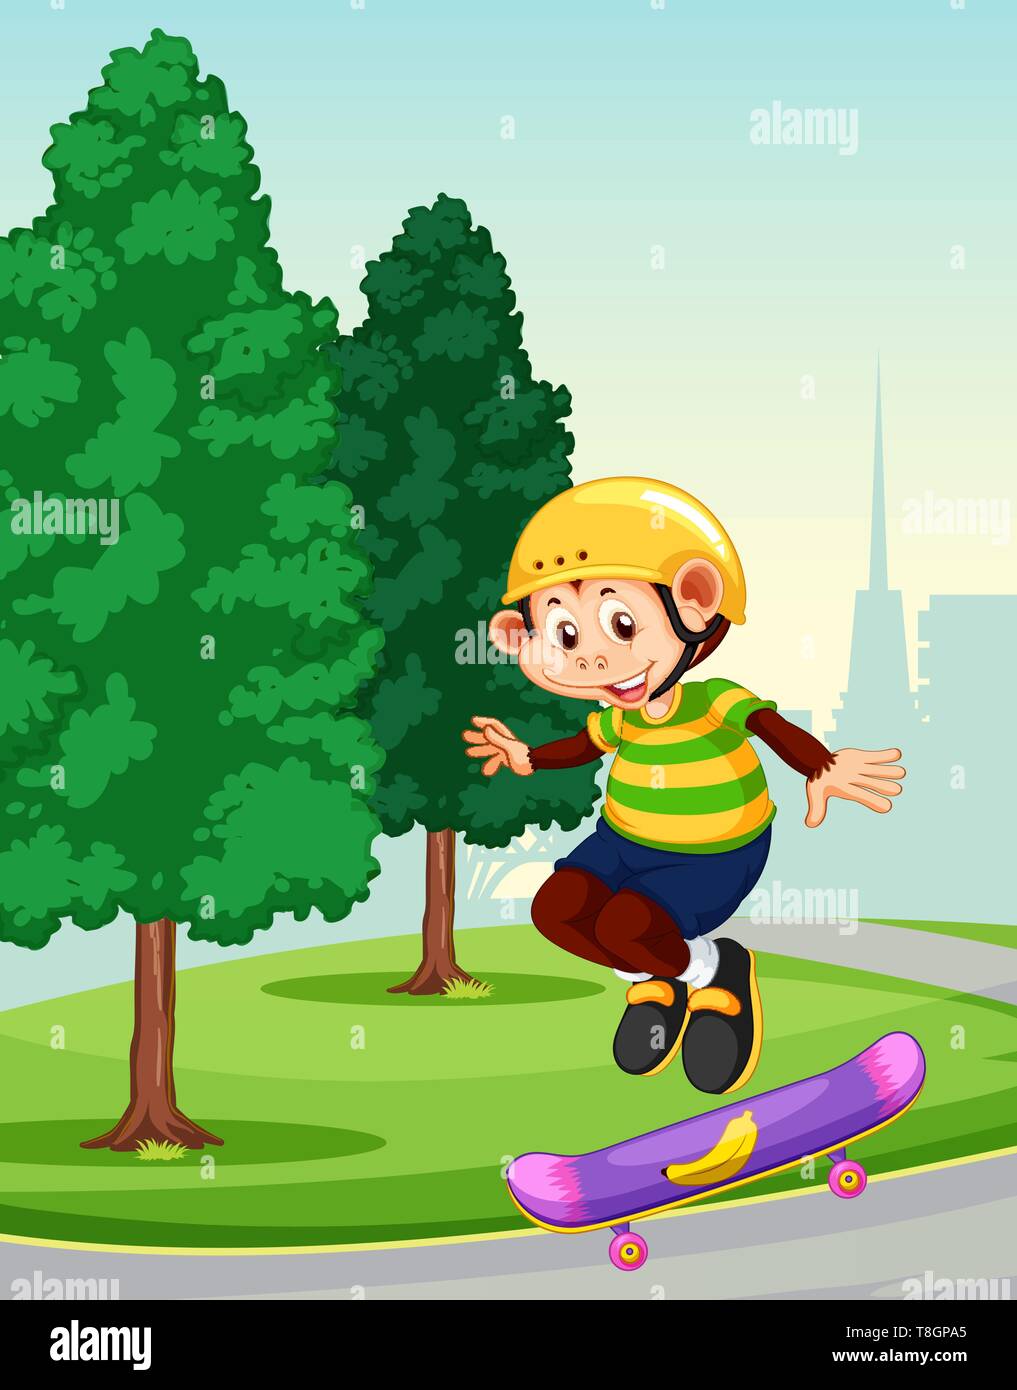 A monkey playing skateboard at the park illustration Stock Vector